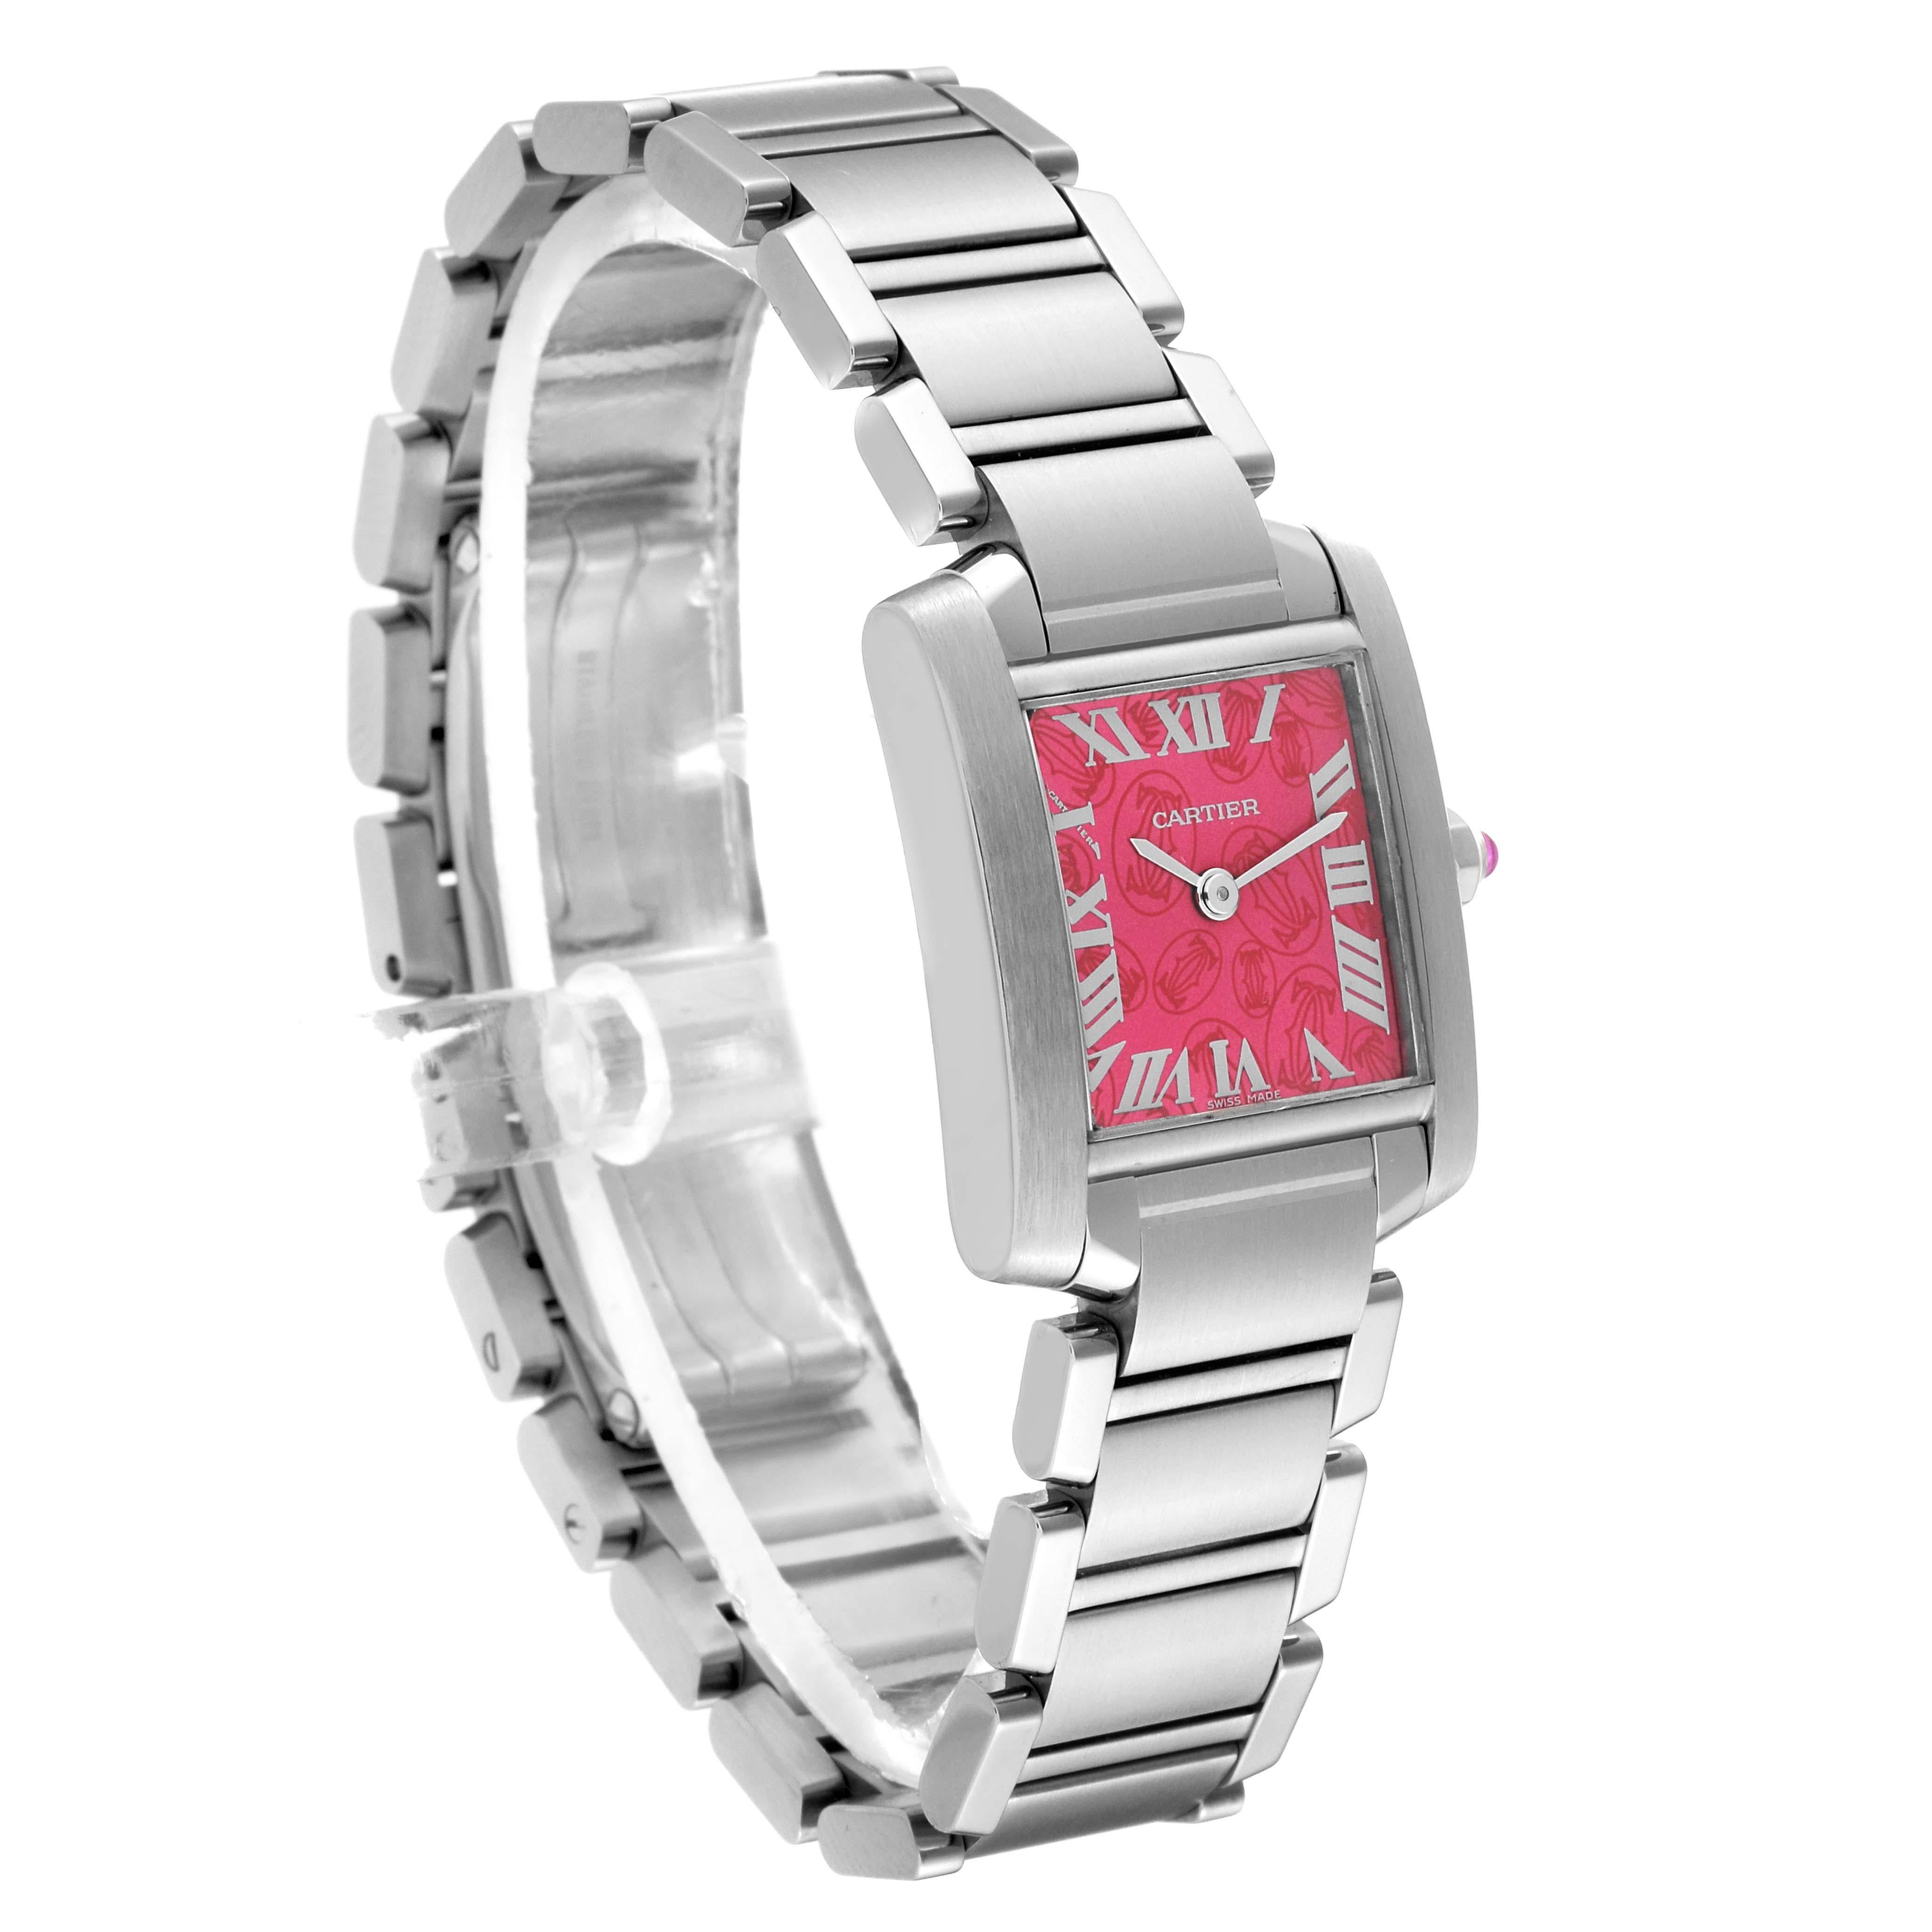 Cartier Tank Francaise Raspberry Dial LE Steel Ladies Watch W51030Q3 In Excellent Condition For Sale In Atlanta, GA